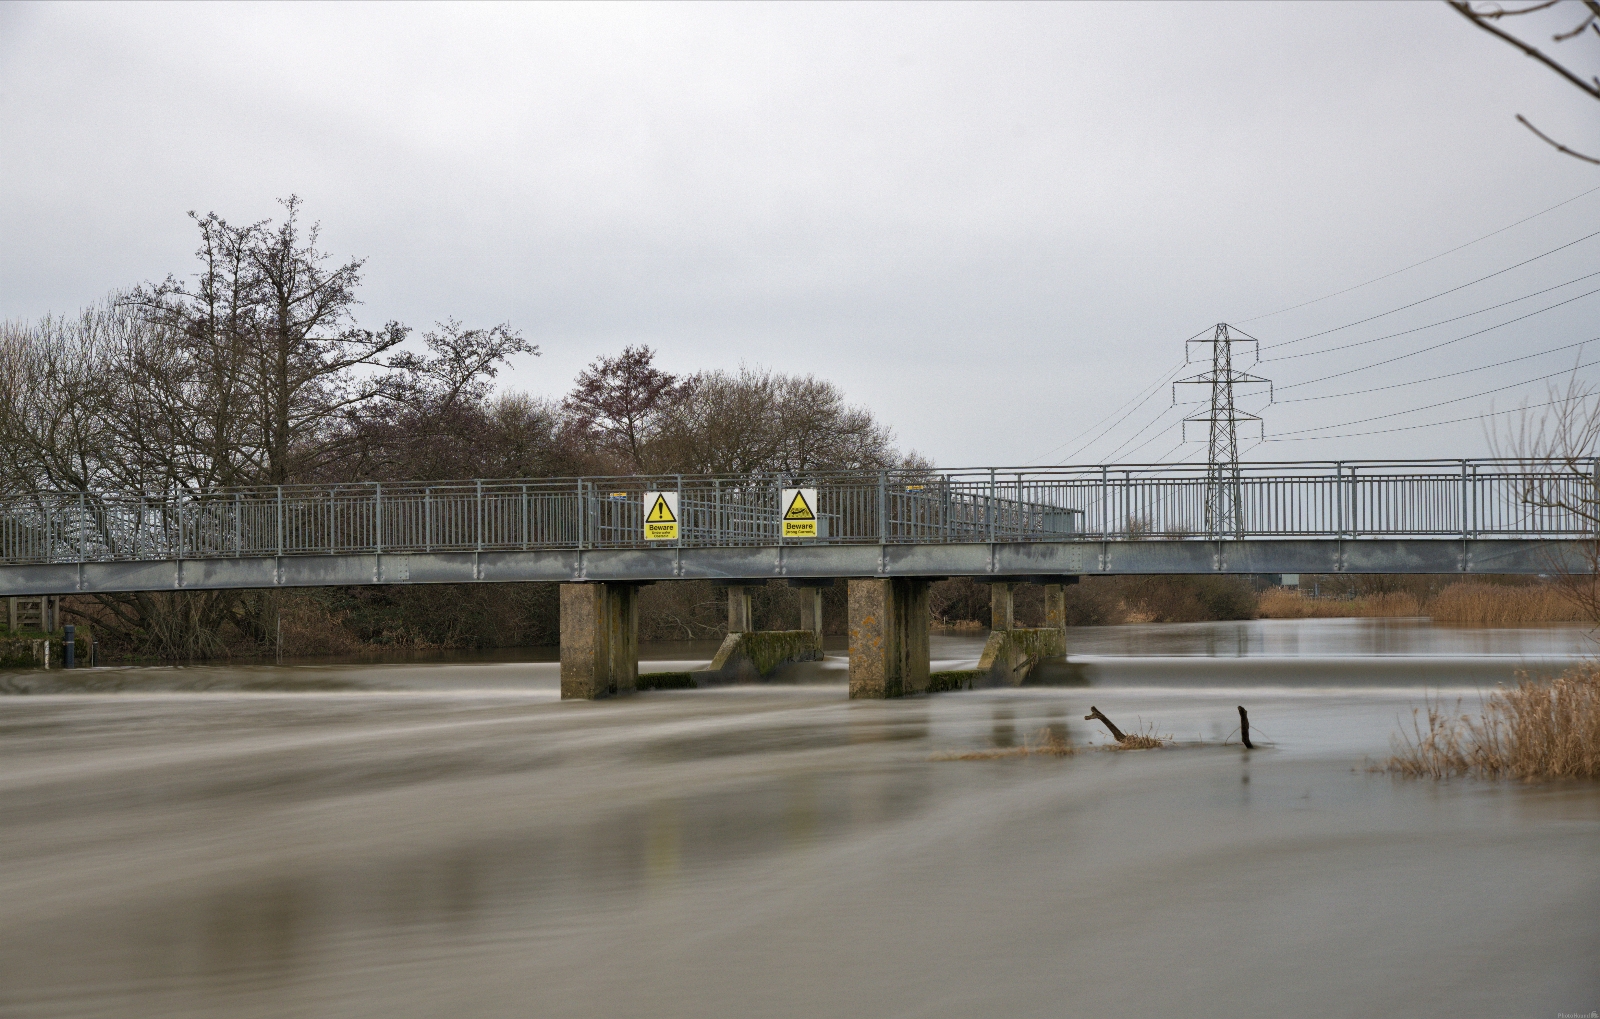 Image of Bridge over the Stour weir at Throop by michael bennett